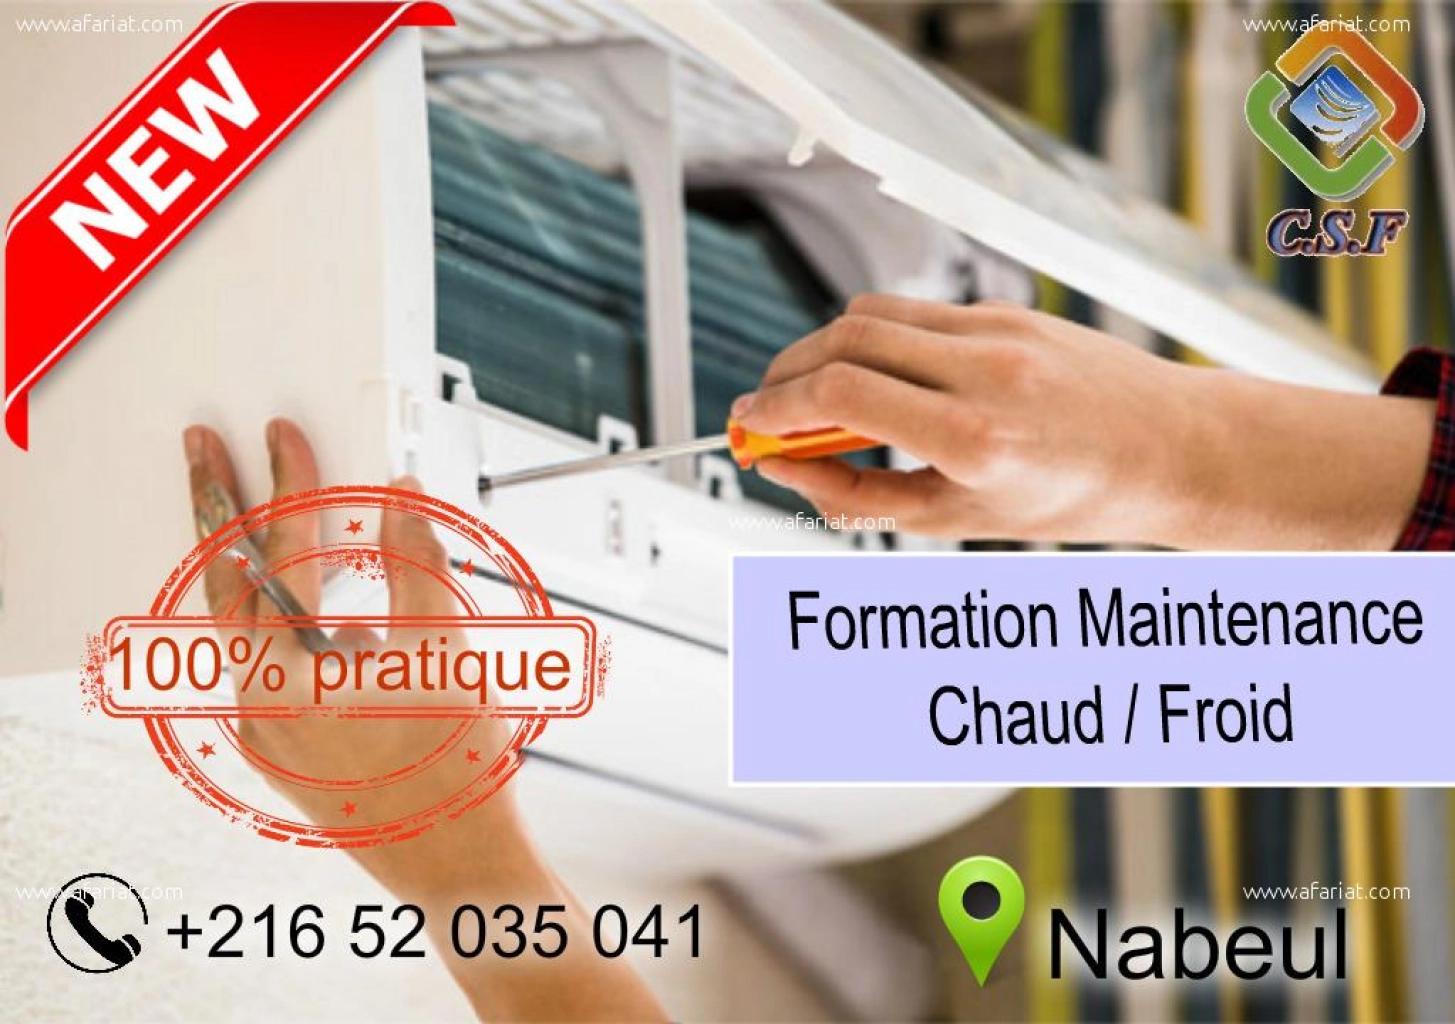 Formation maintenance Chaud / Froid